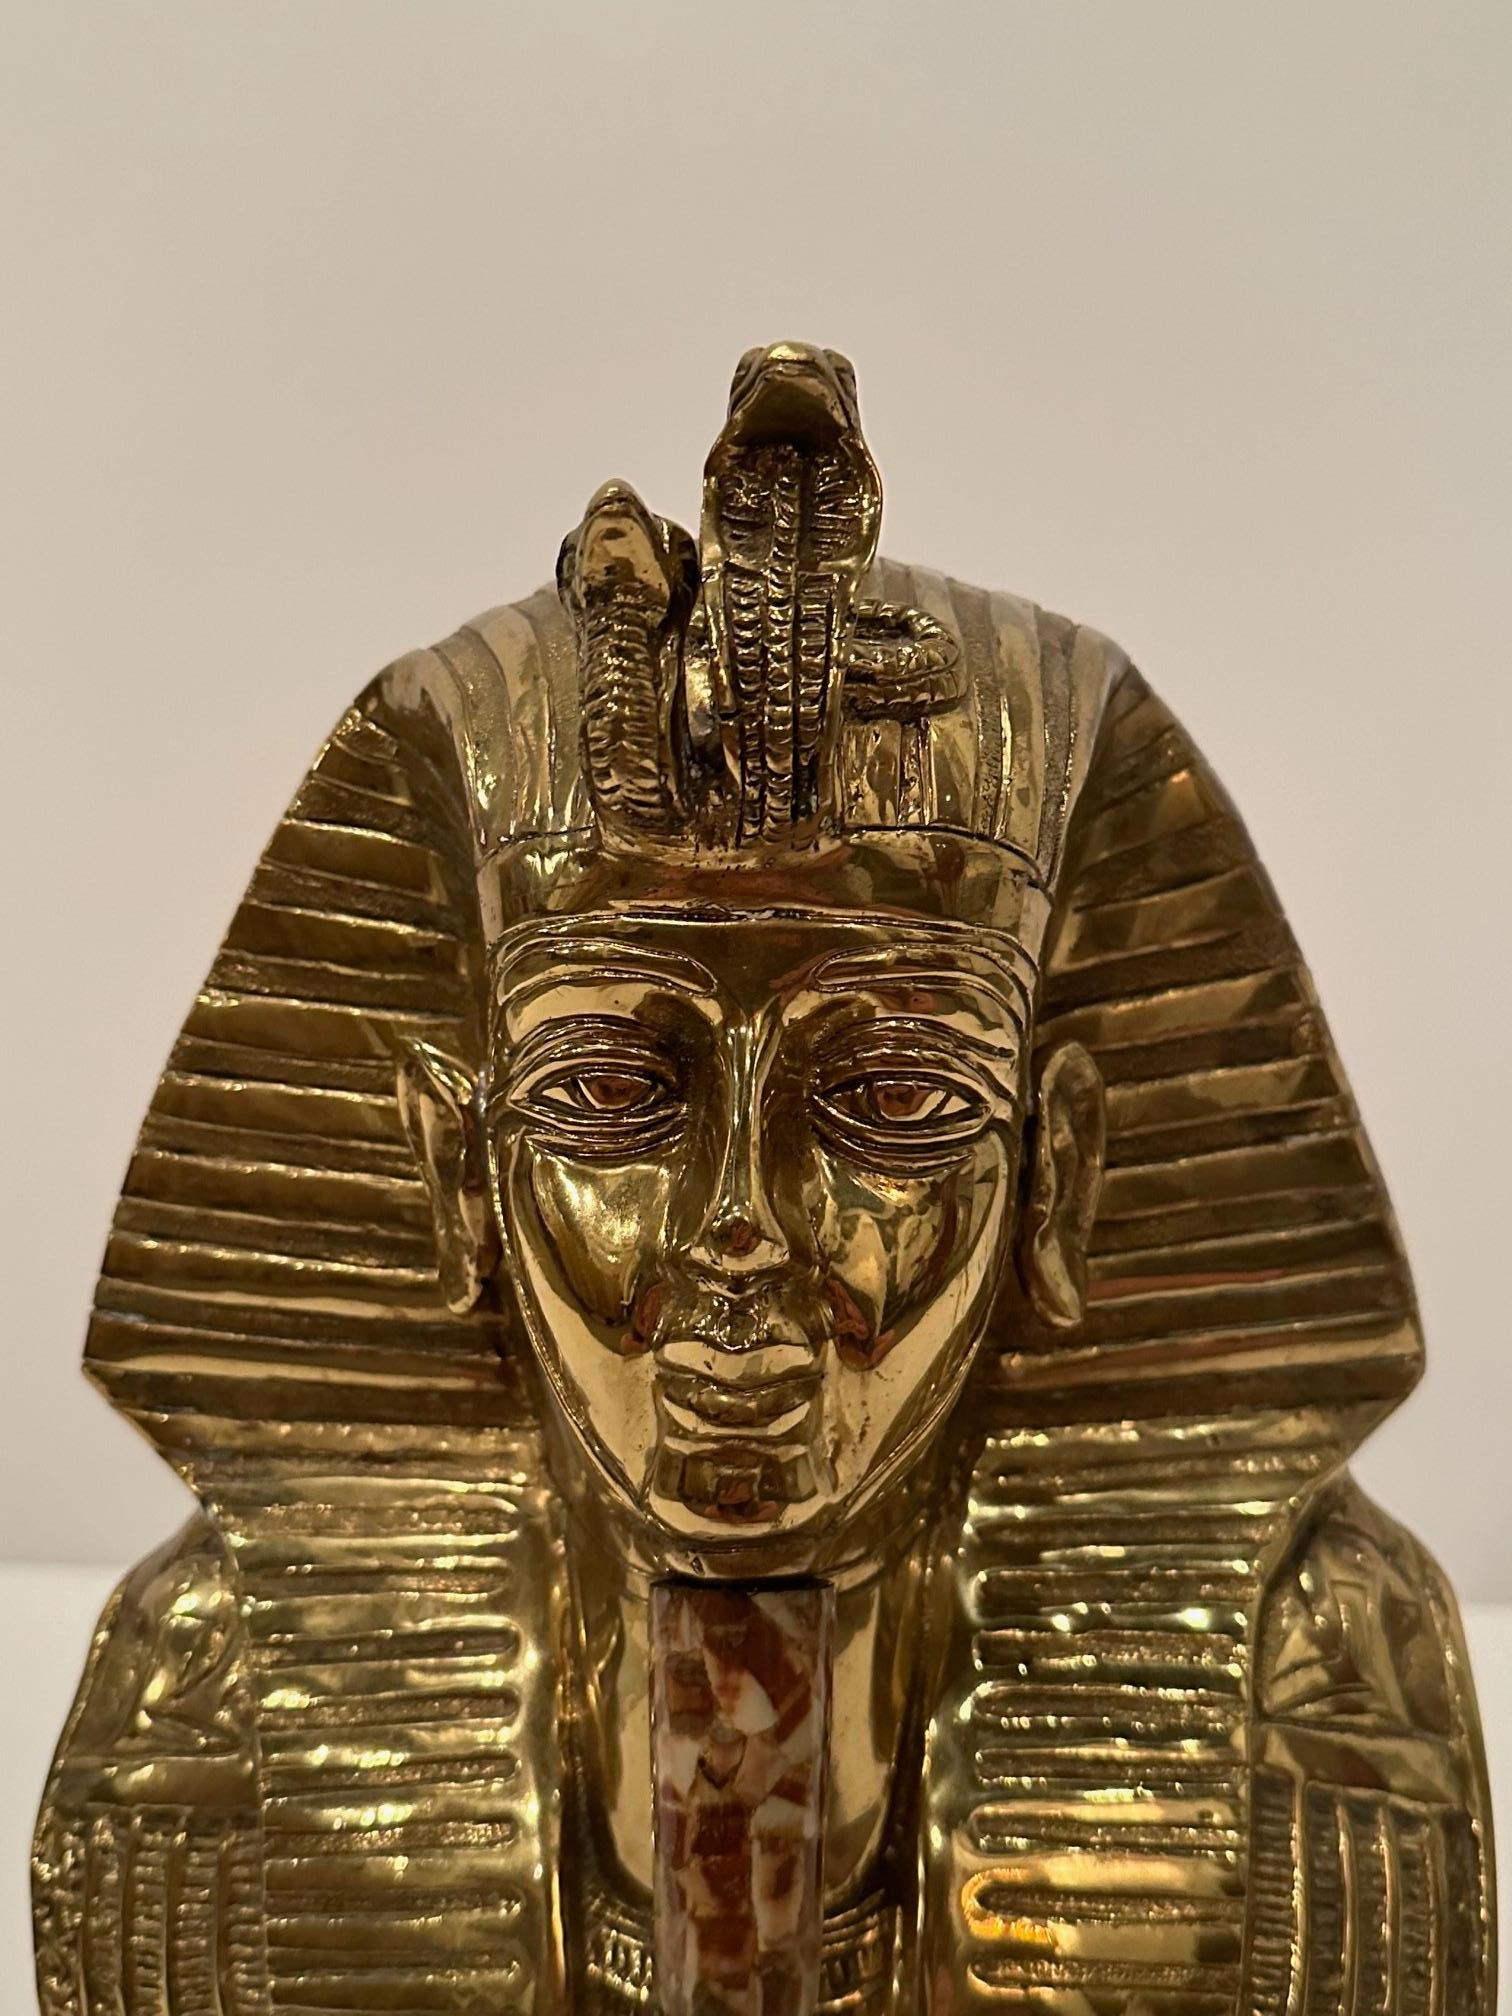 Dramatic large brass bust of King Tut having stone inlaid accent on the beard and resin base.